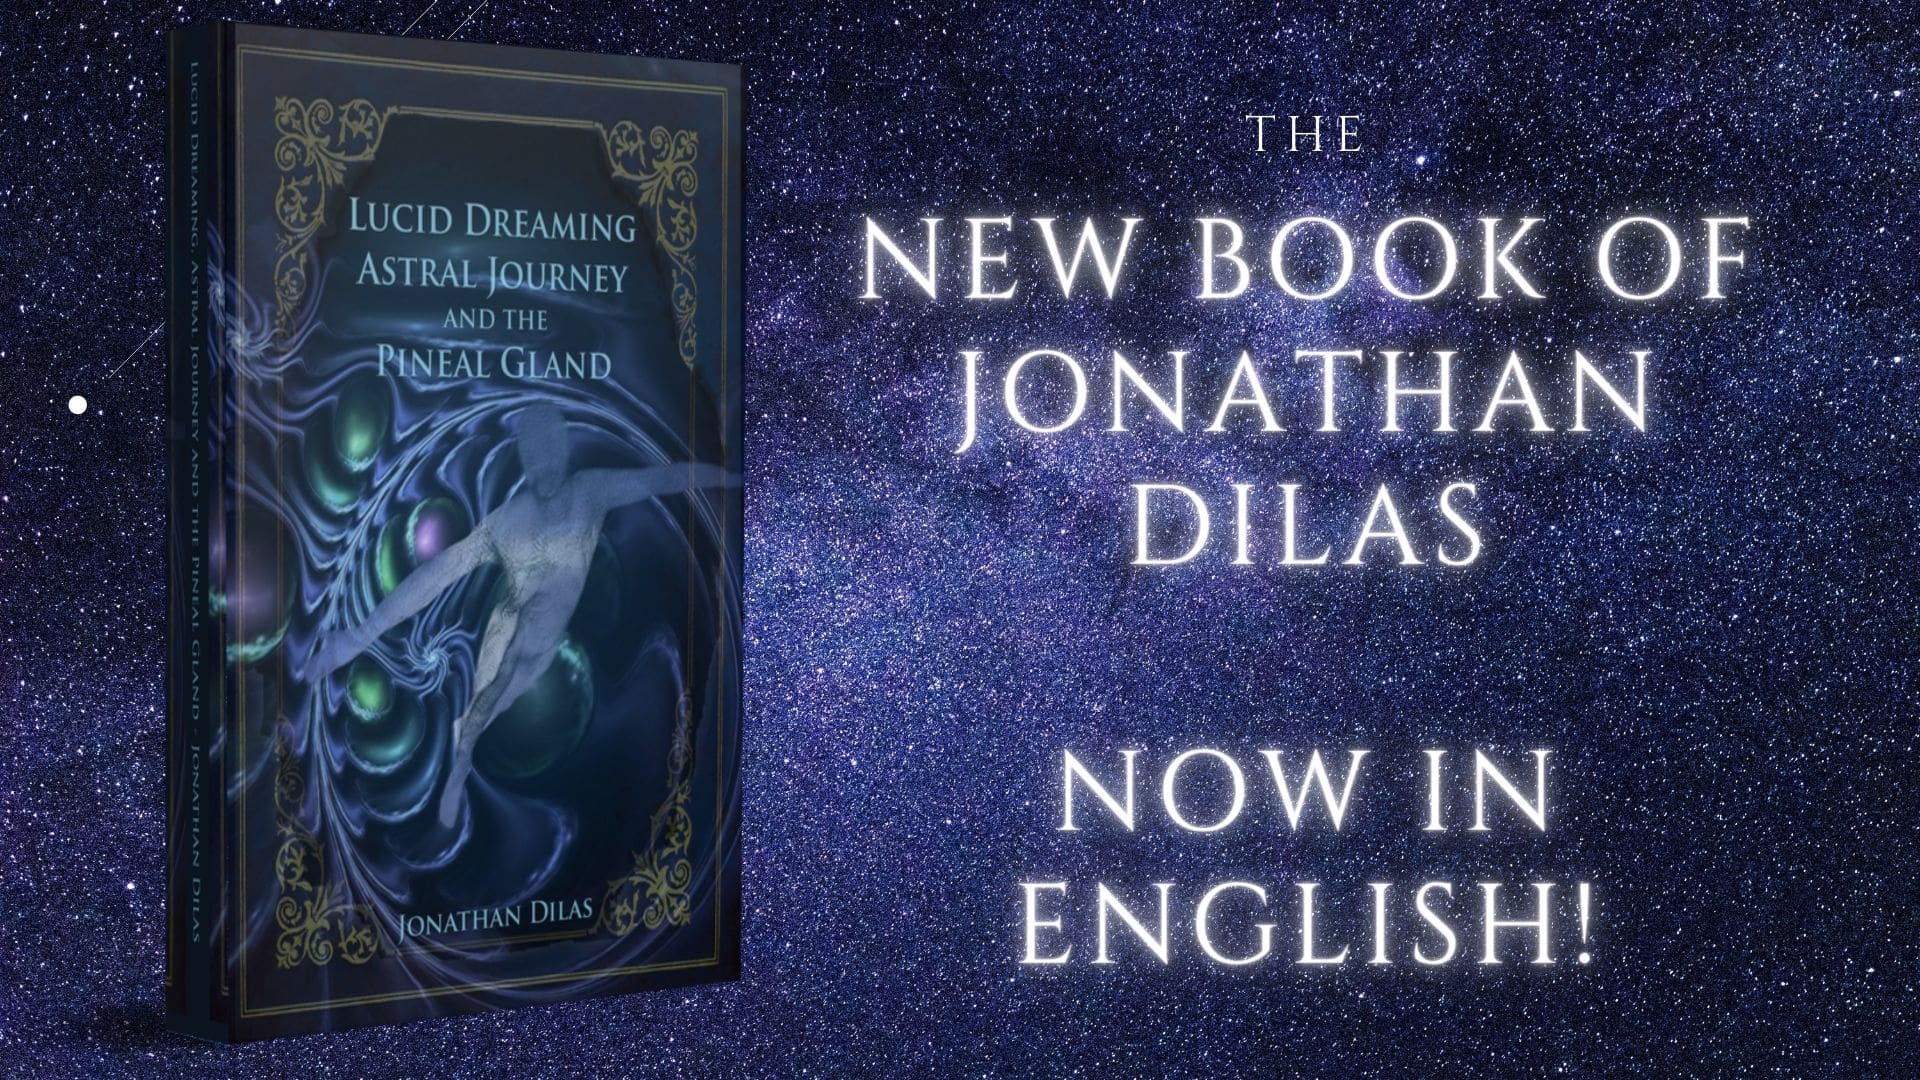 "Lucid Dreaming, Astral Journeys and the Pineal Gland“ by Jonathan Dilas